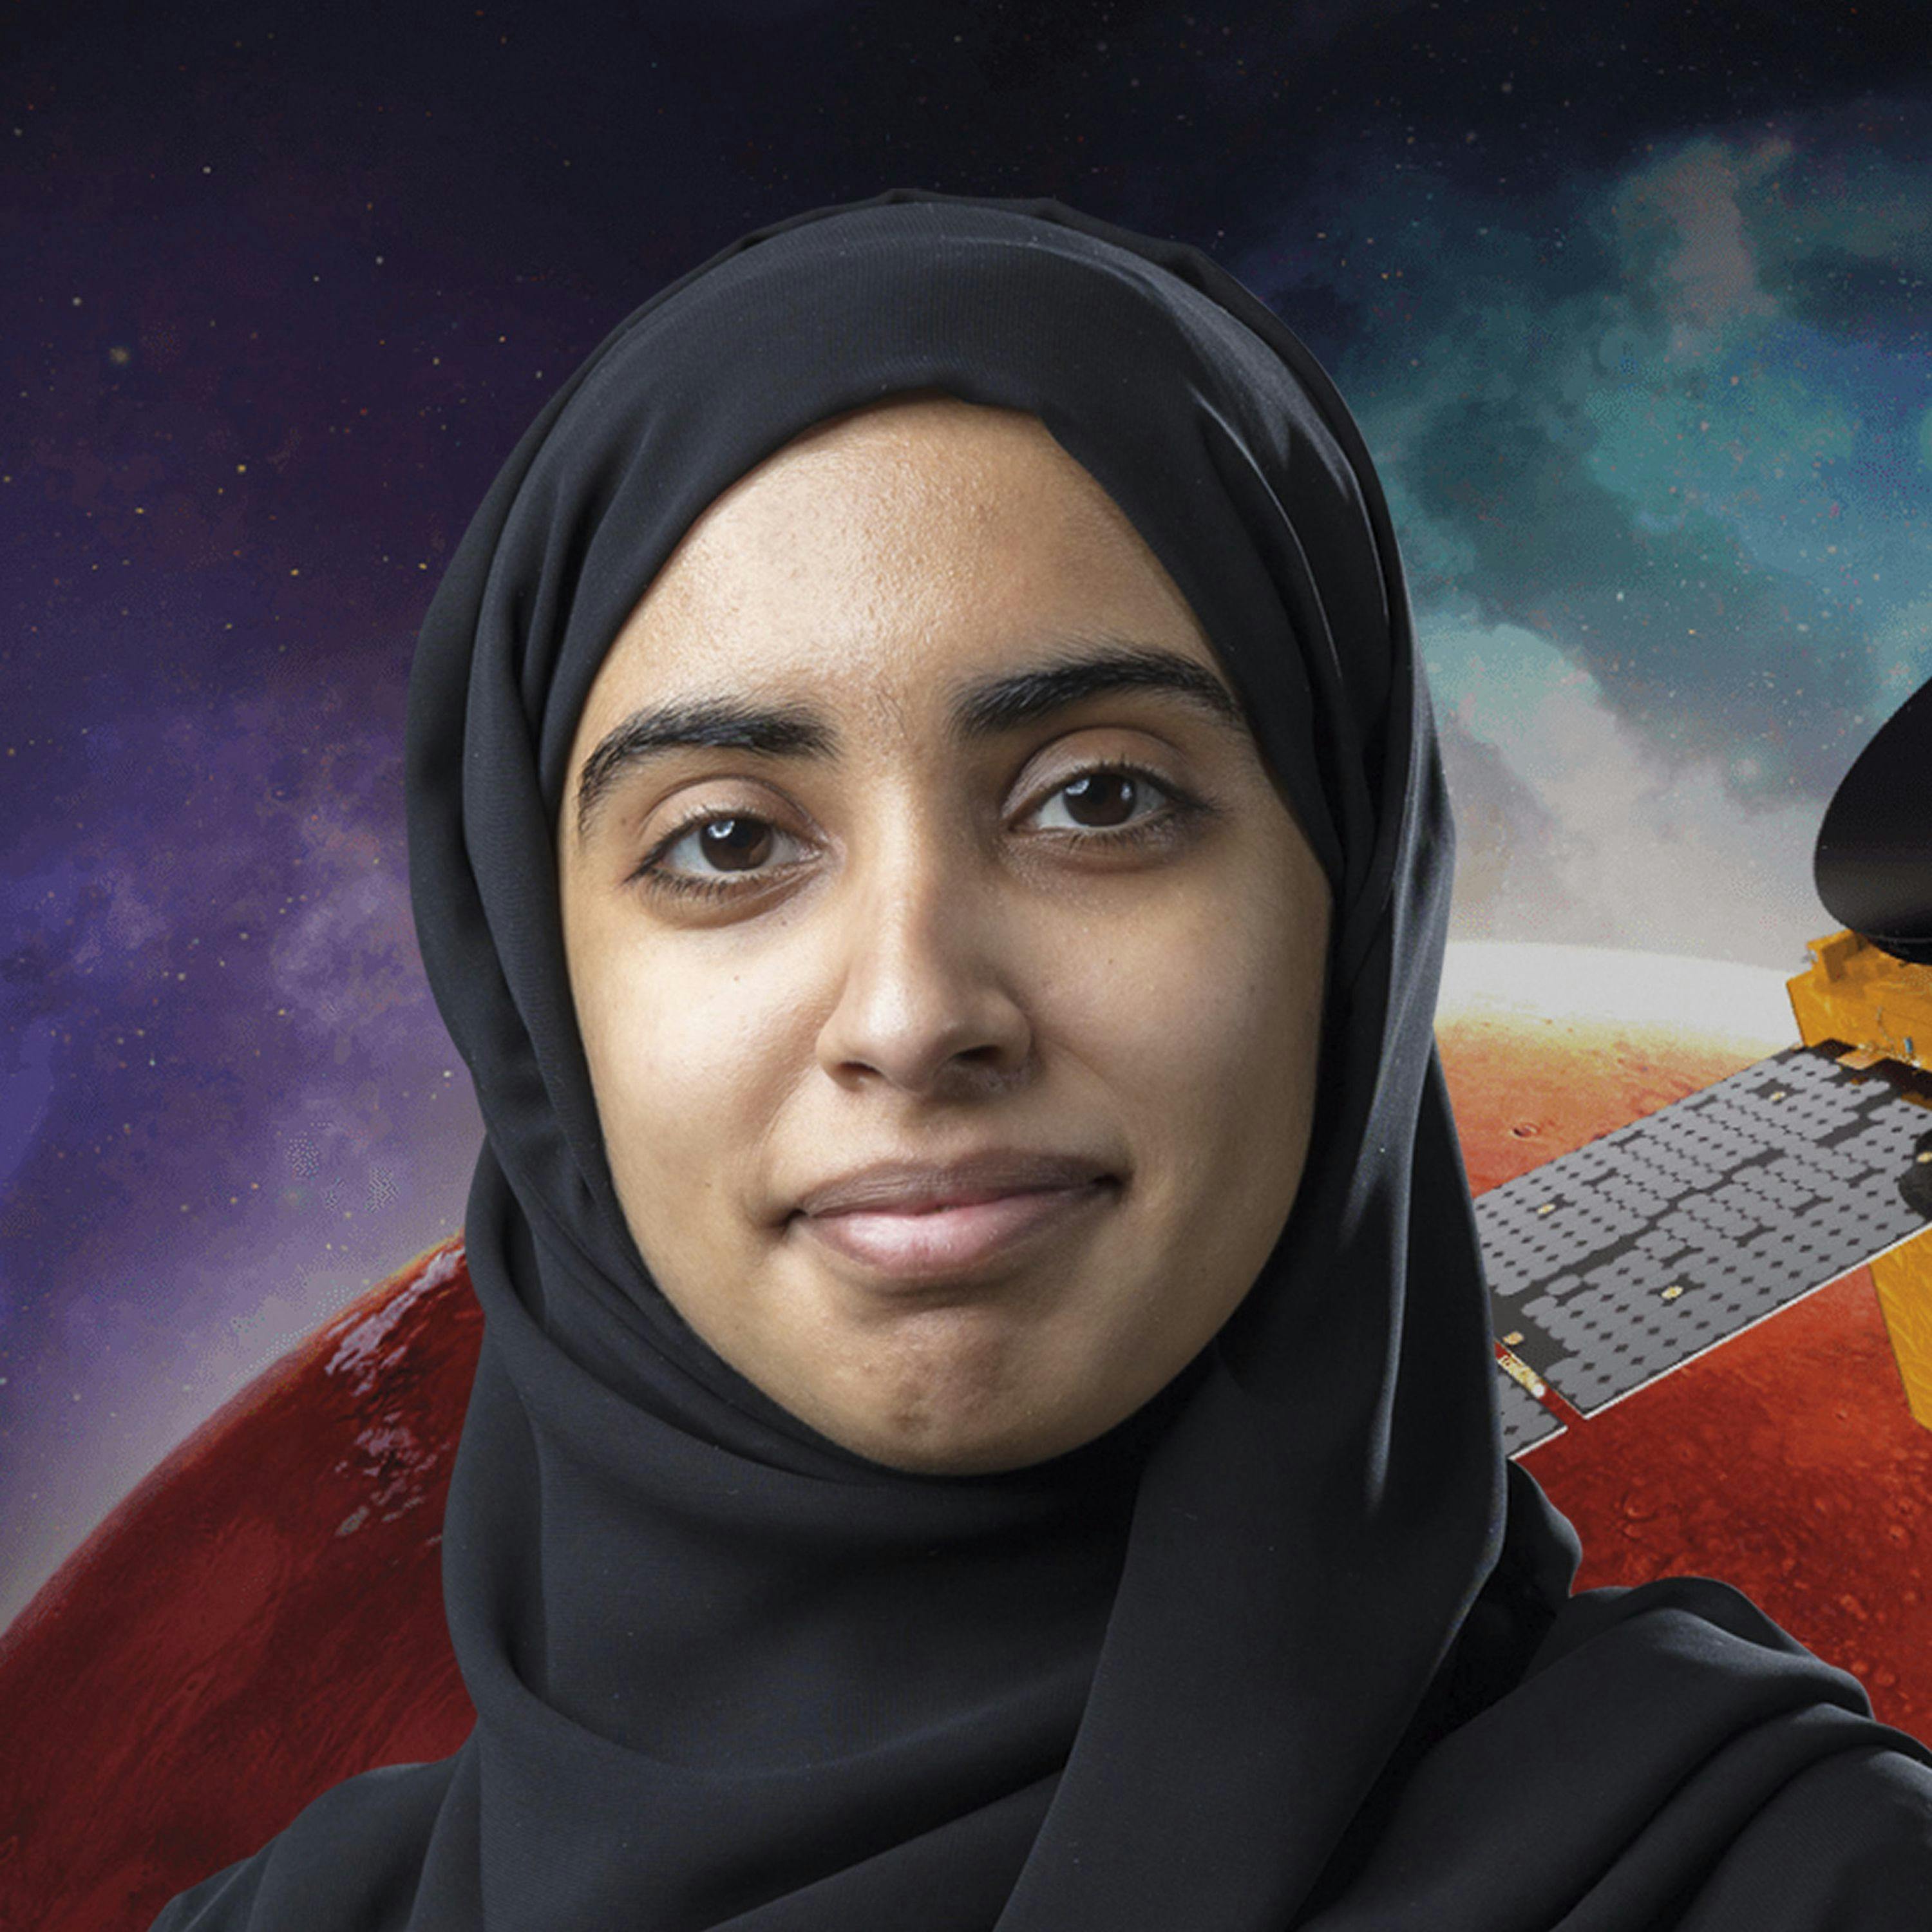 Interview: The Emirates Mars Mission with Hessa Al Matroushi